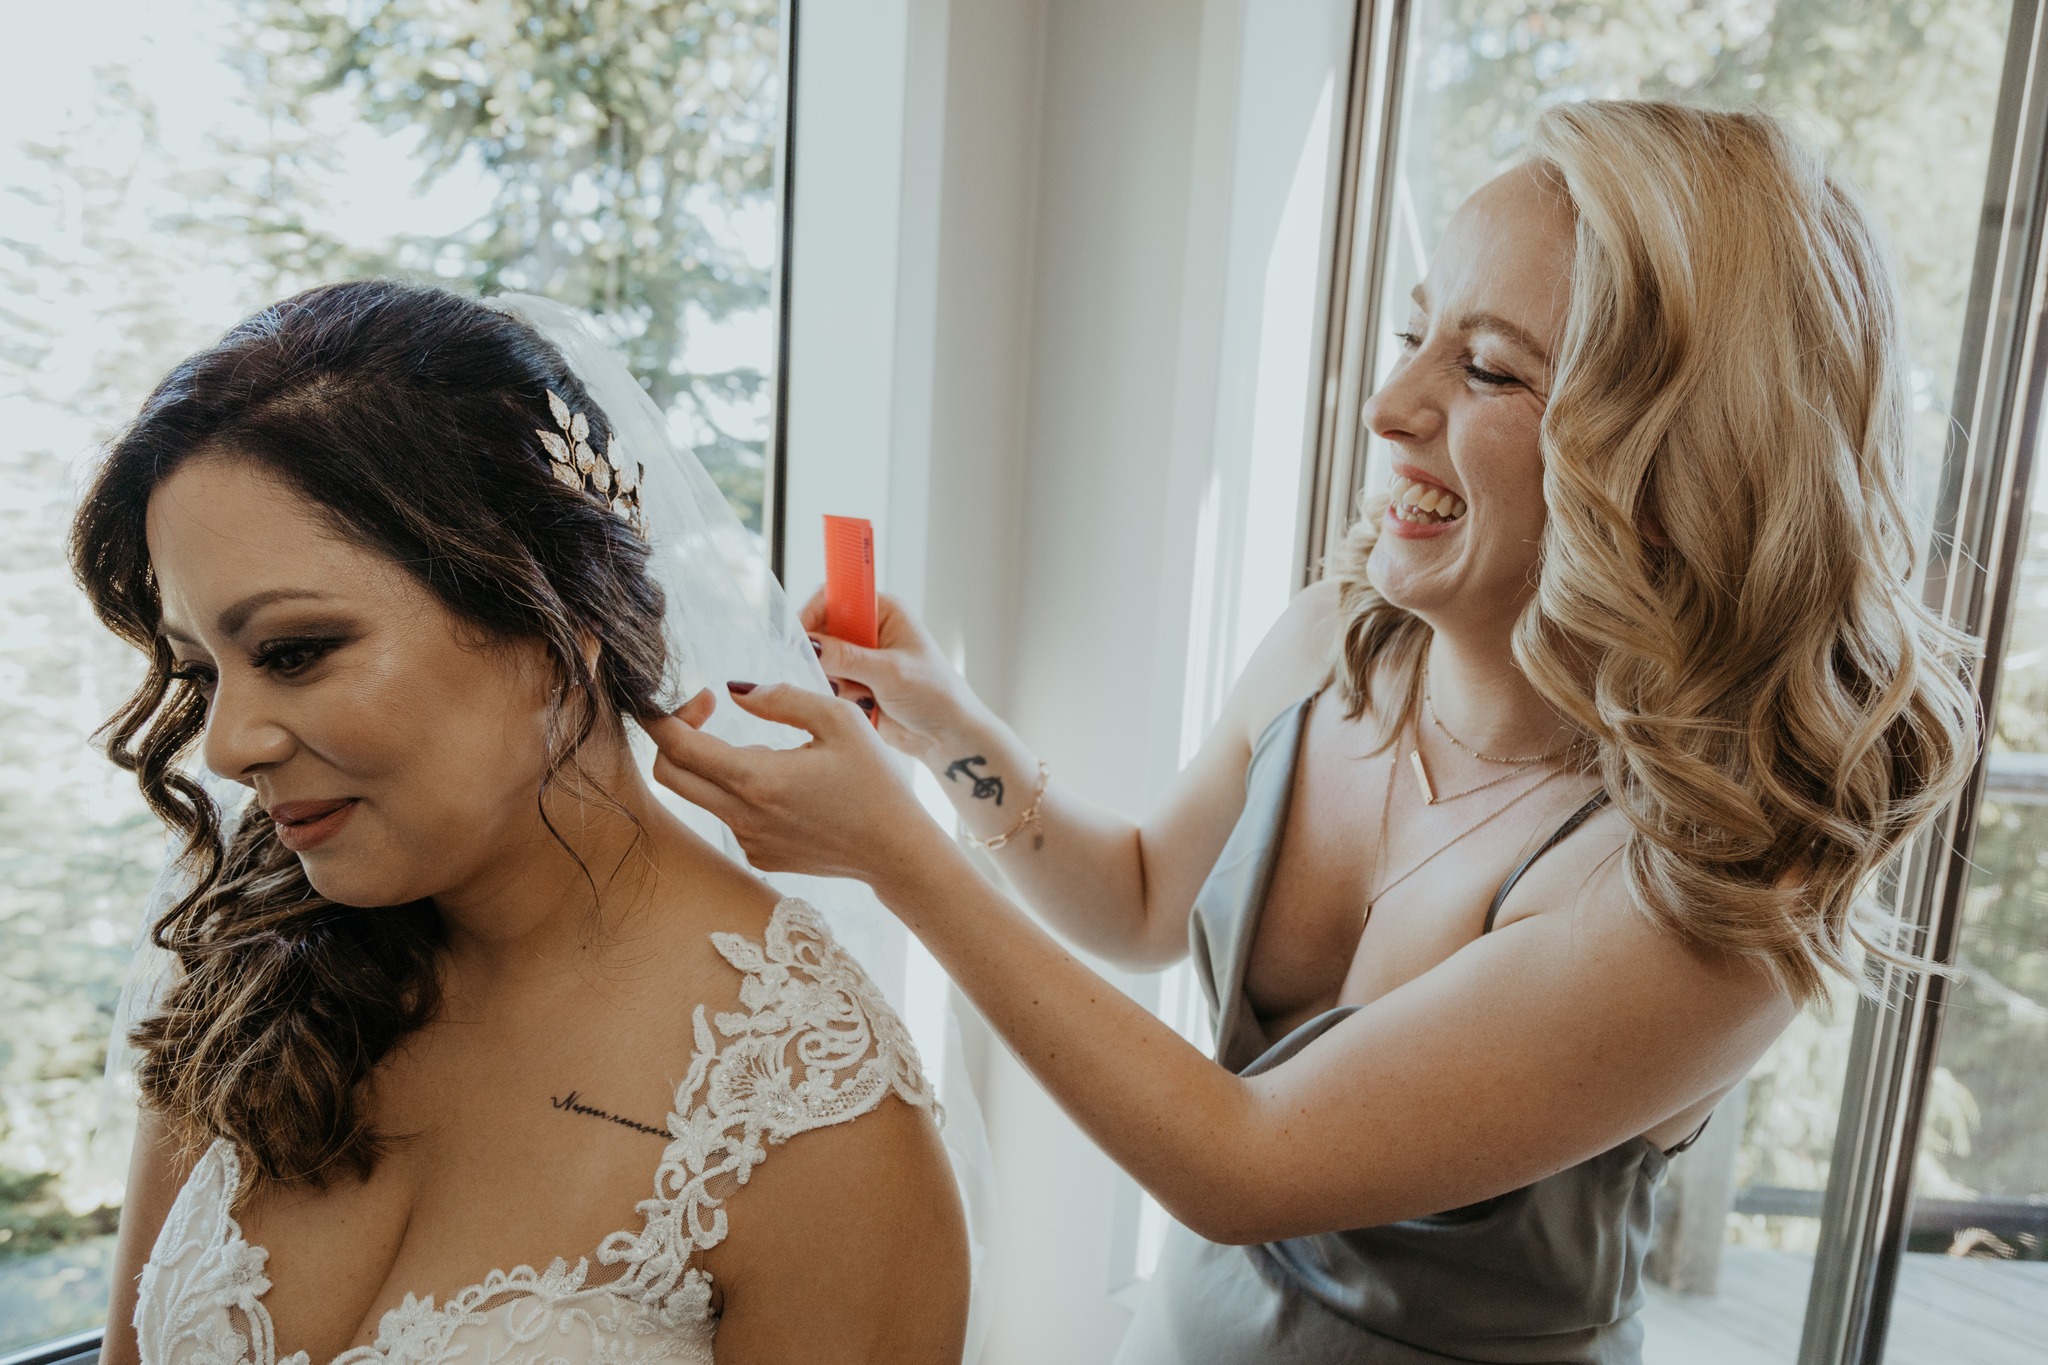 MAKE SURE THESE 10 BRIDAL MAKEUP MISTAKES WON’T BE PRESENT ON YOUR WEDDING DAY